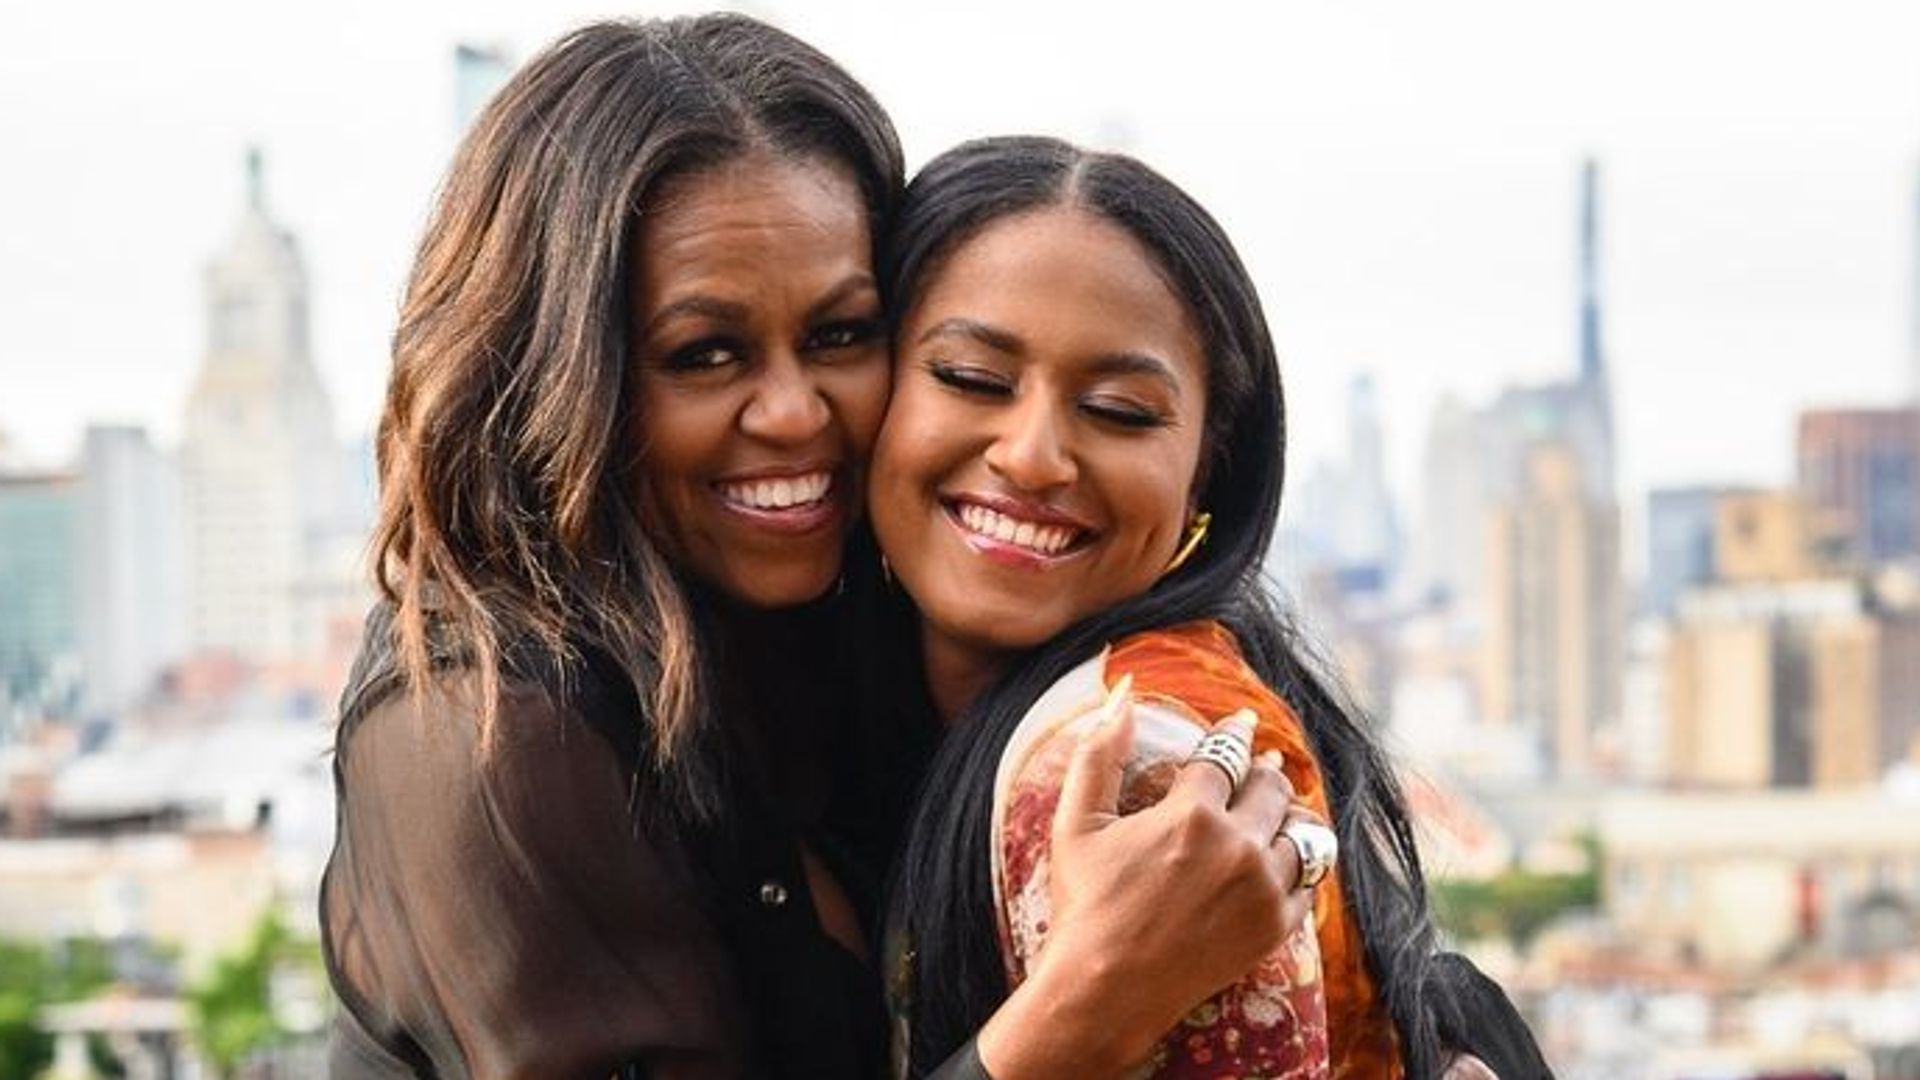 Michelle Obama's daughter Sasha, 23, rocks rainbow heels as she poses at rooftop bar with famous mom on bittersweet day